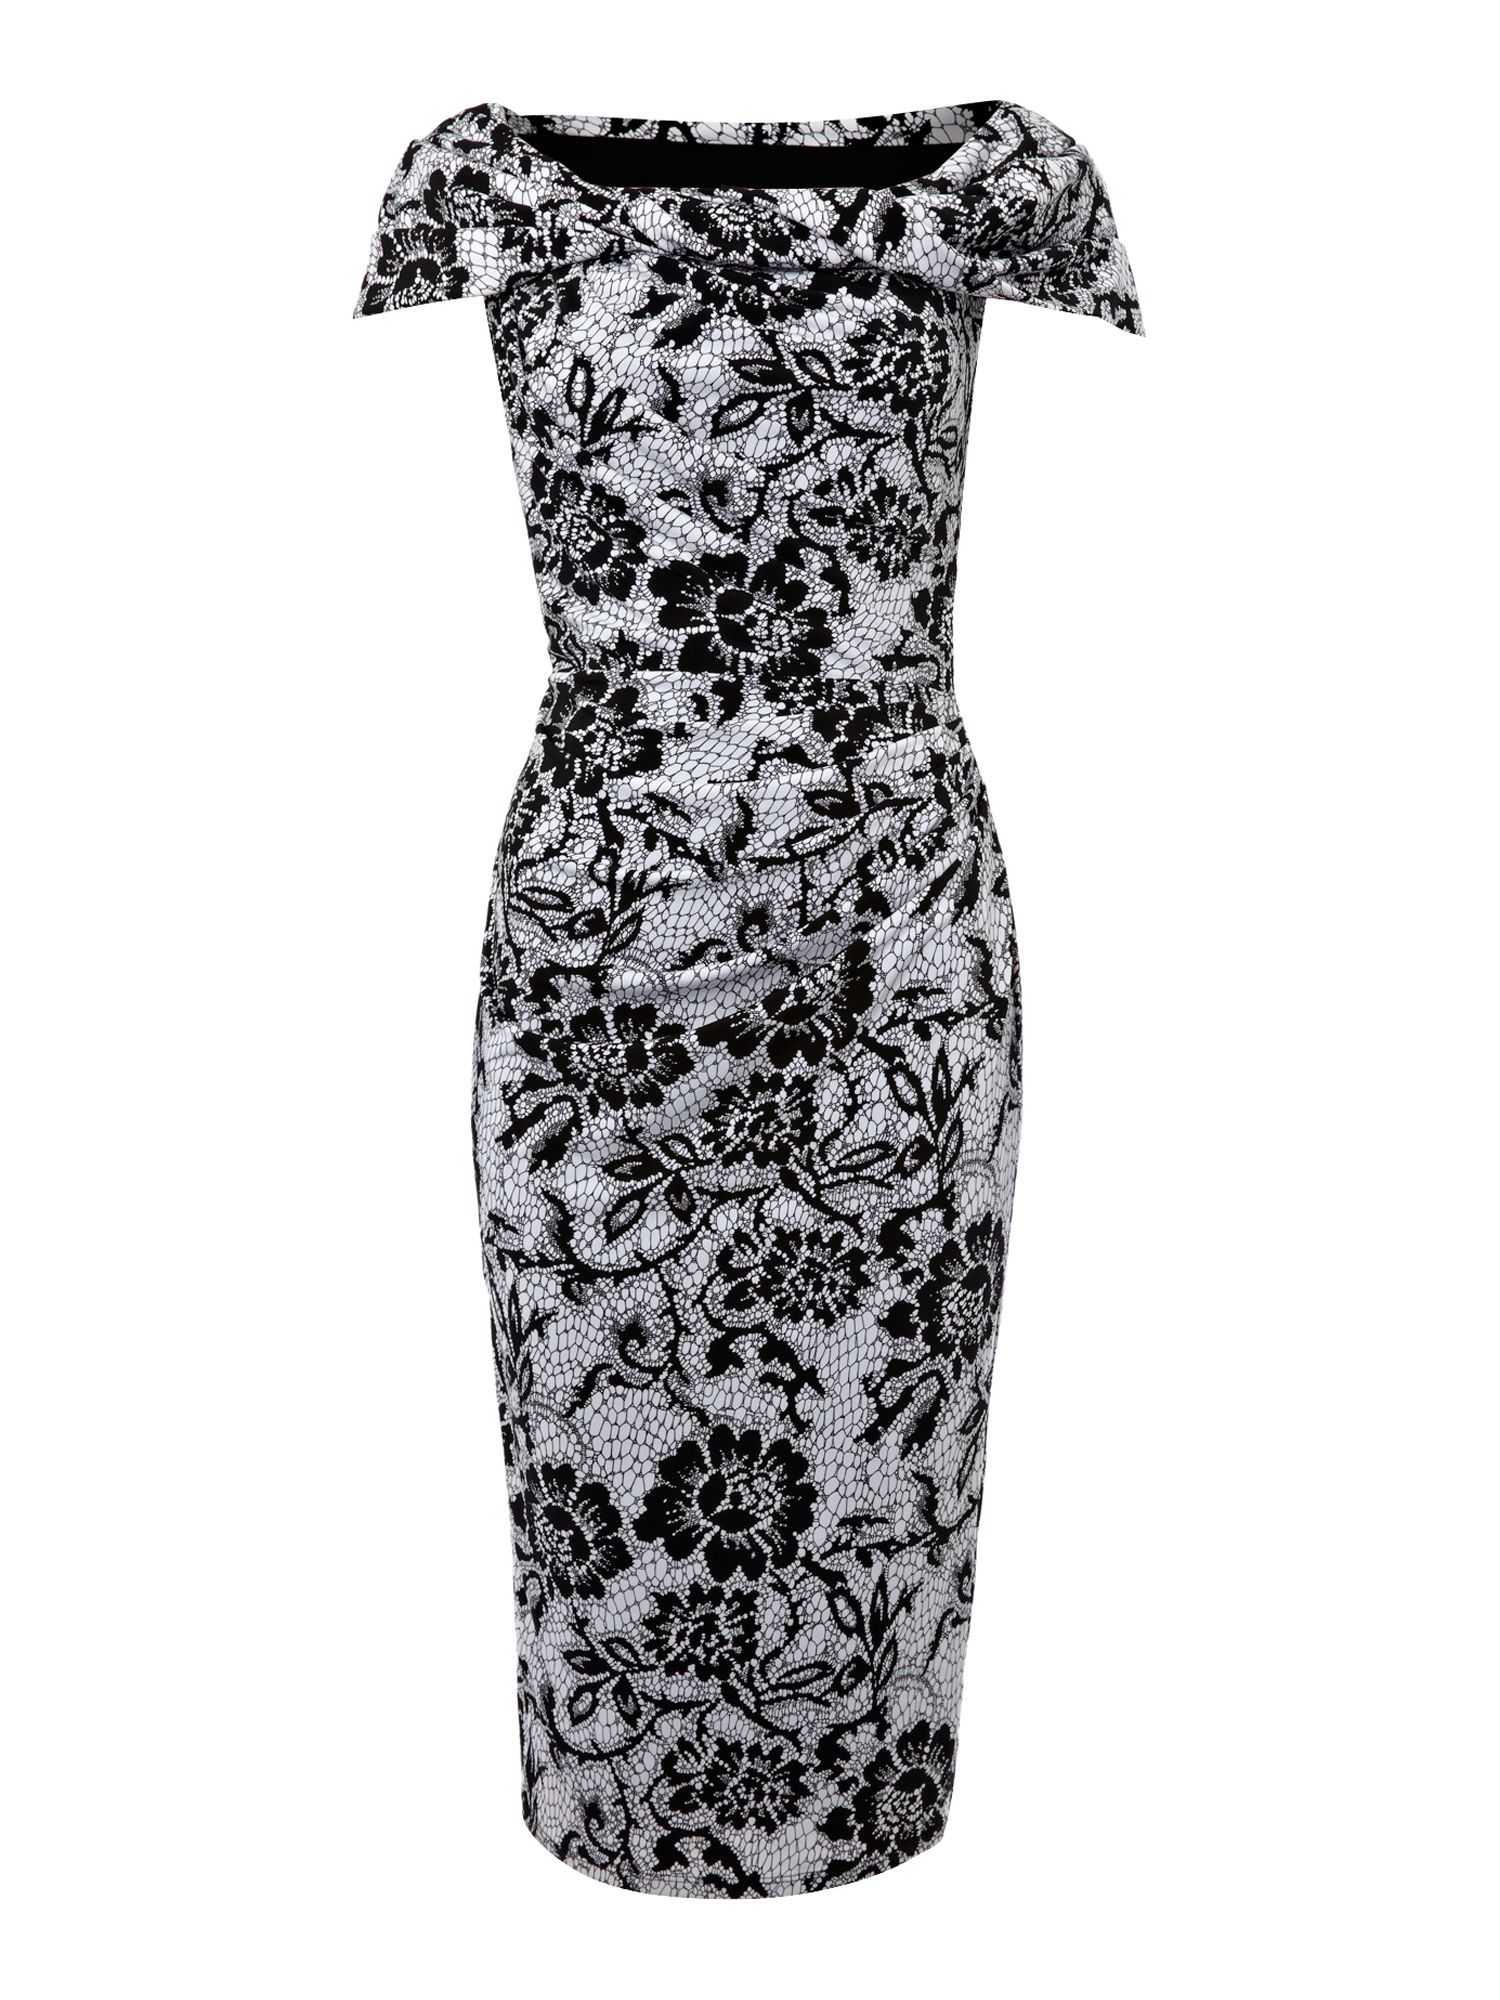 Pied a terre Lace Print Slinky Knot Dress in Black (Black/White) | Lyst